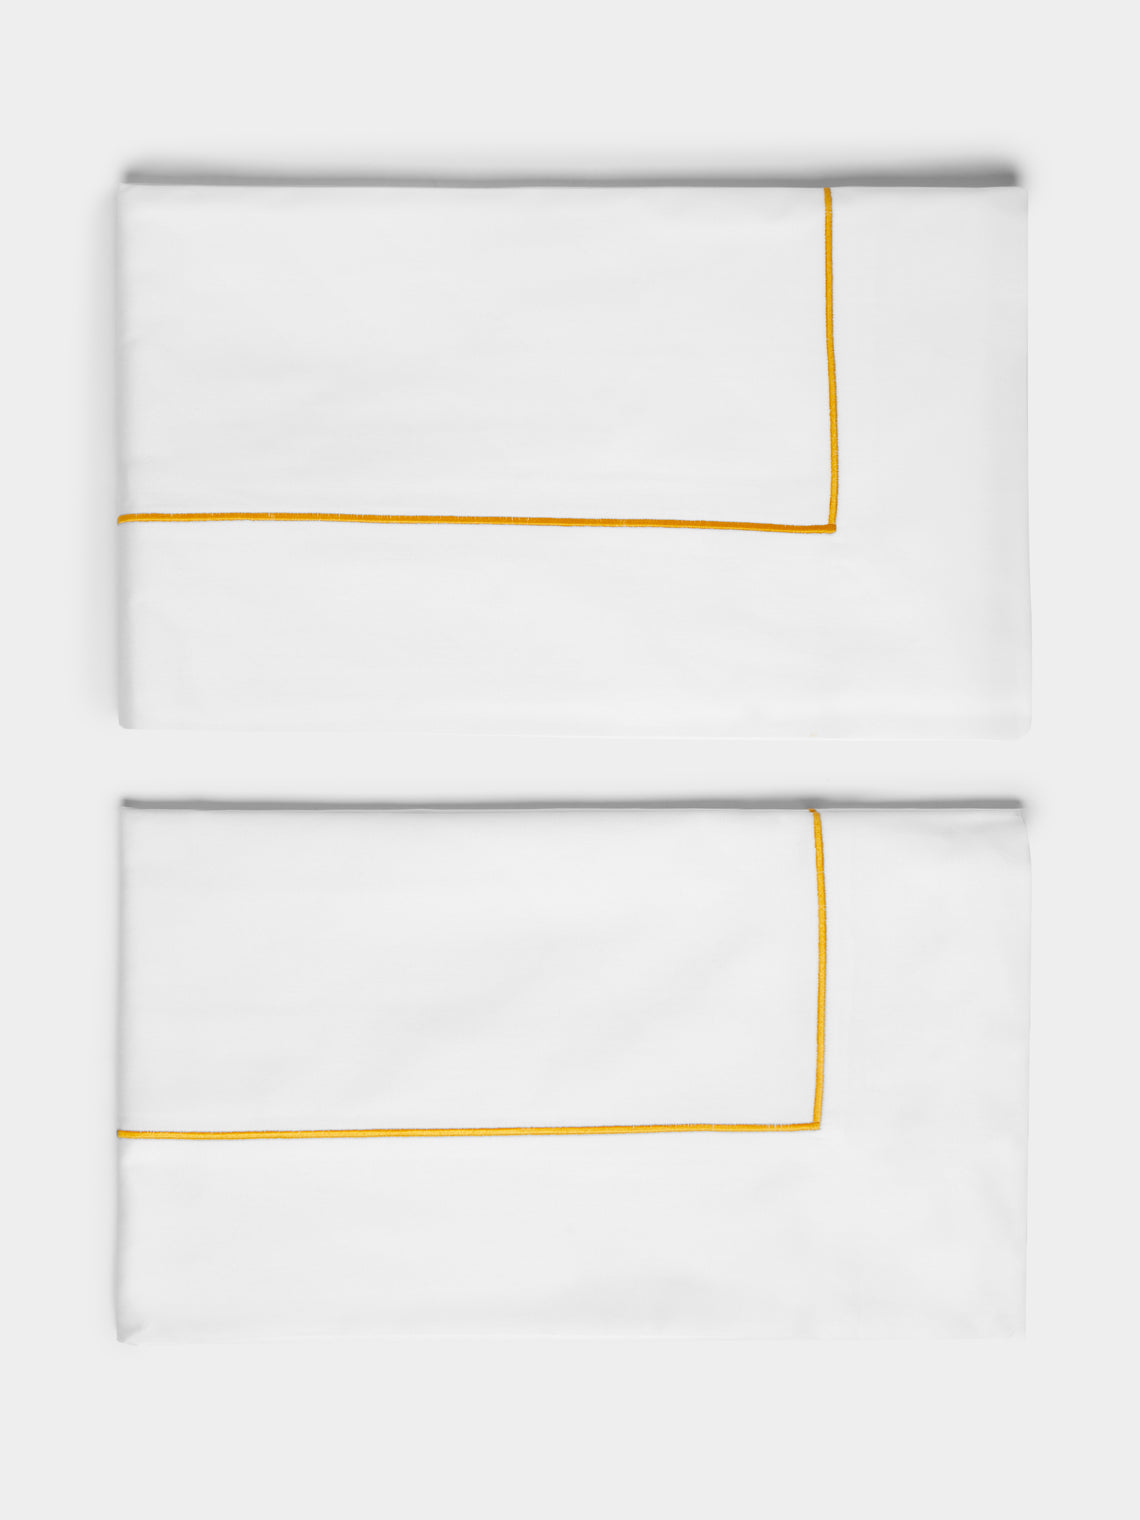 Loretta Caponi - Hand-Embroidered Cotton King-Size Pillowcases (Set of 2) -  - ABASK